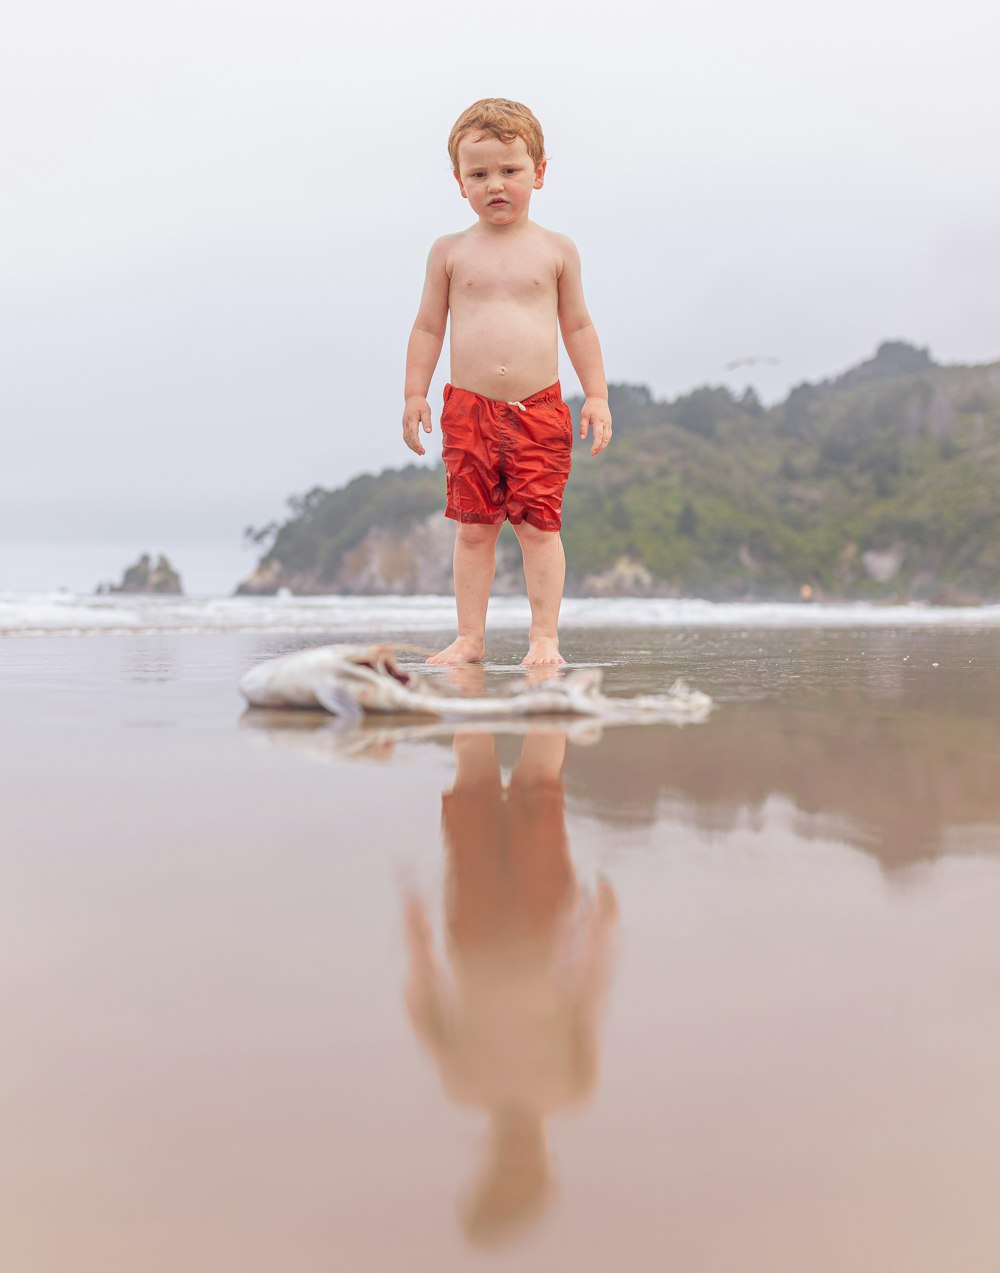 a young boy standing on a surfboard on the beach